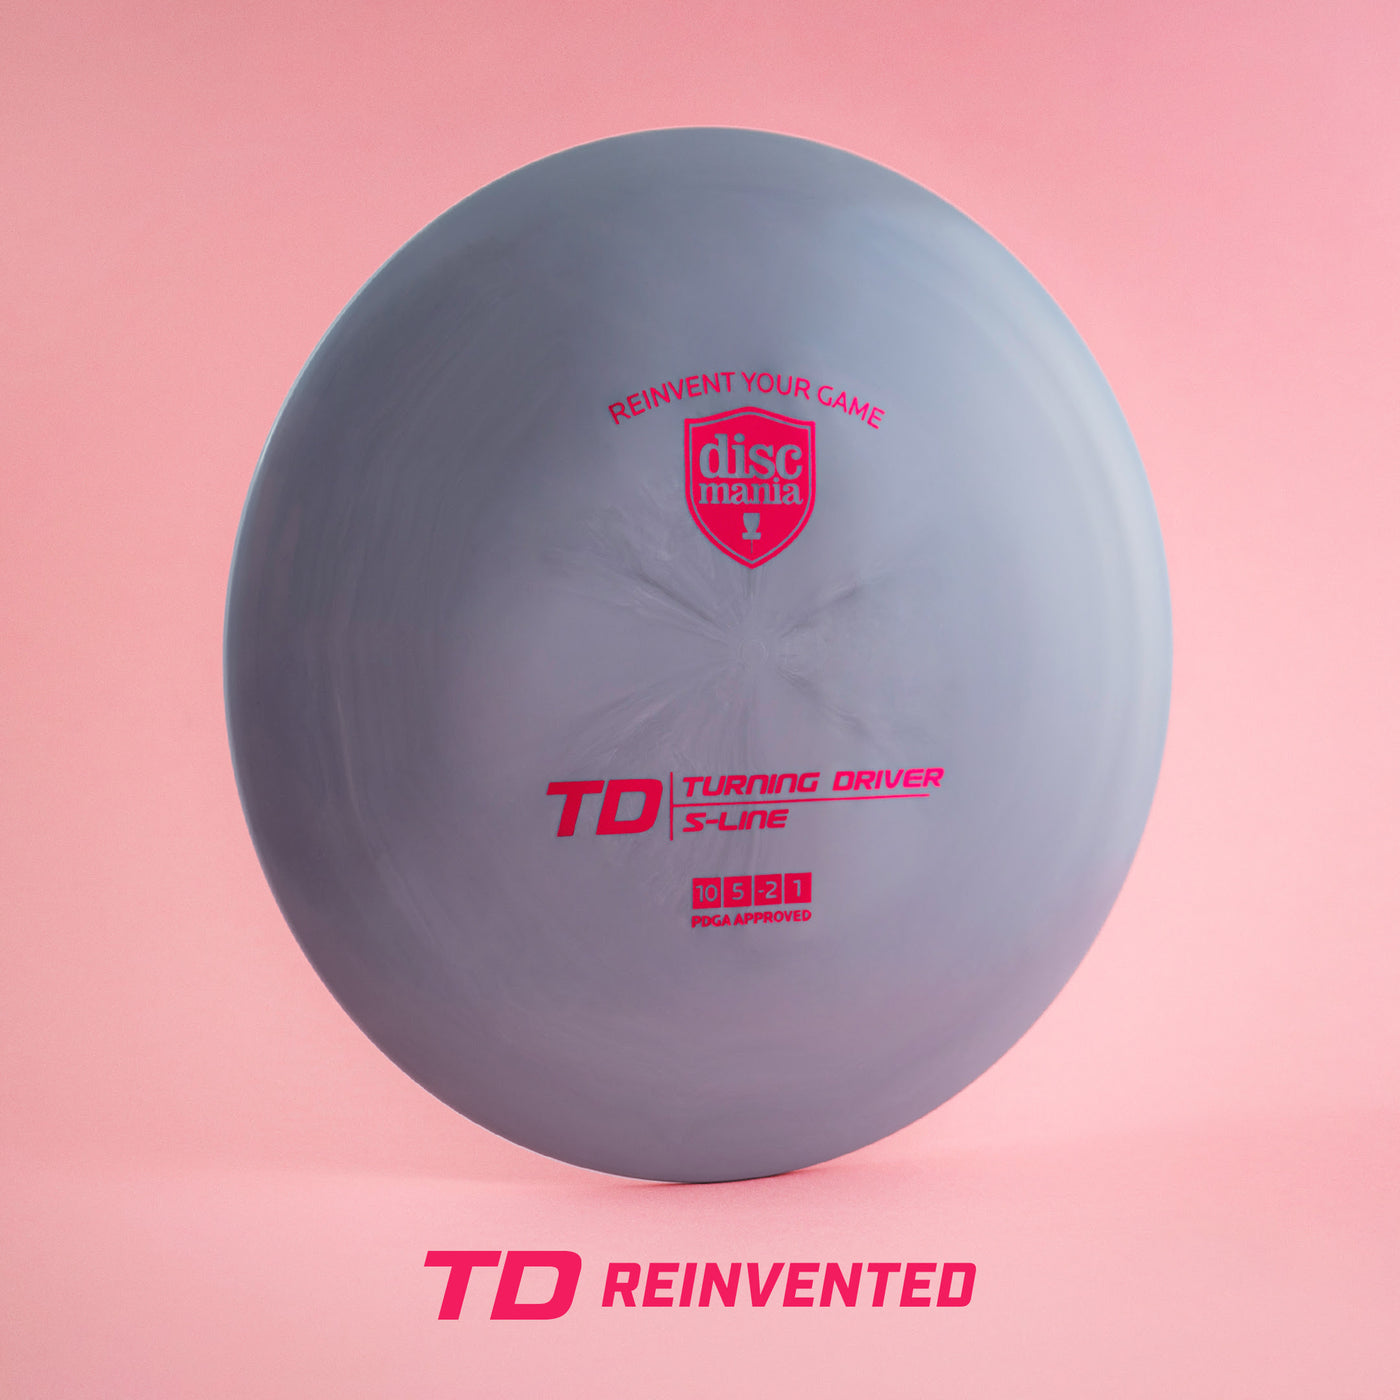 Discmania TD Reinvented Distance Driver